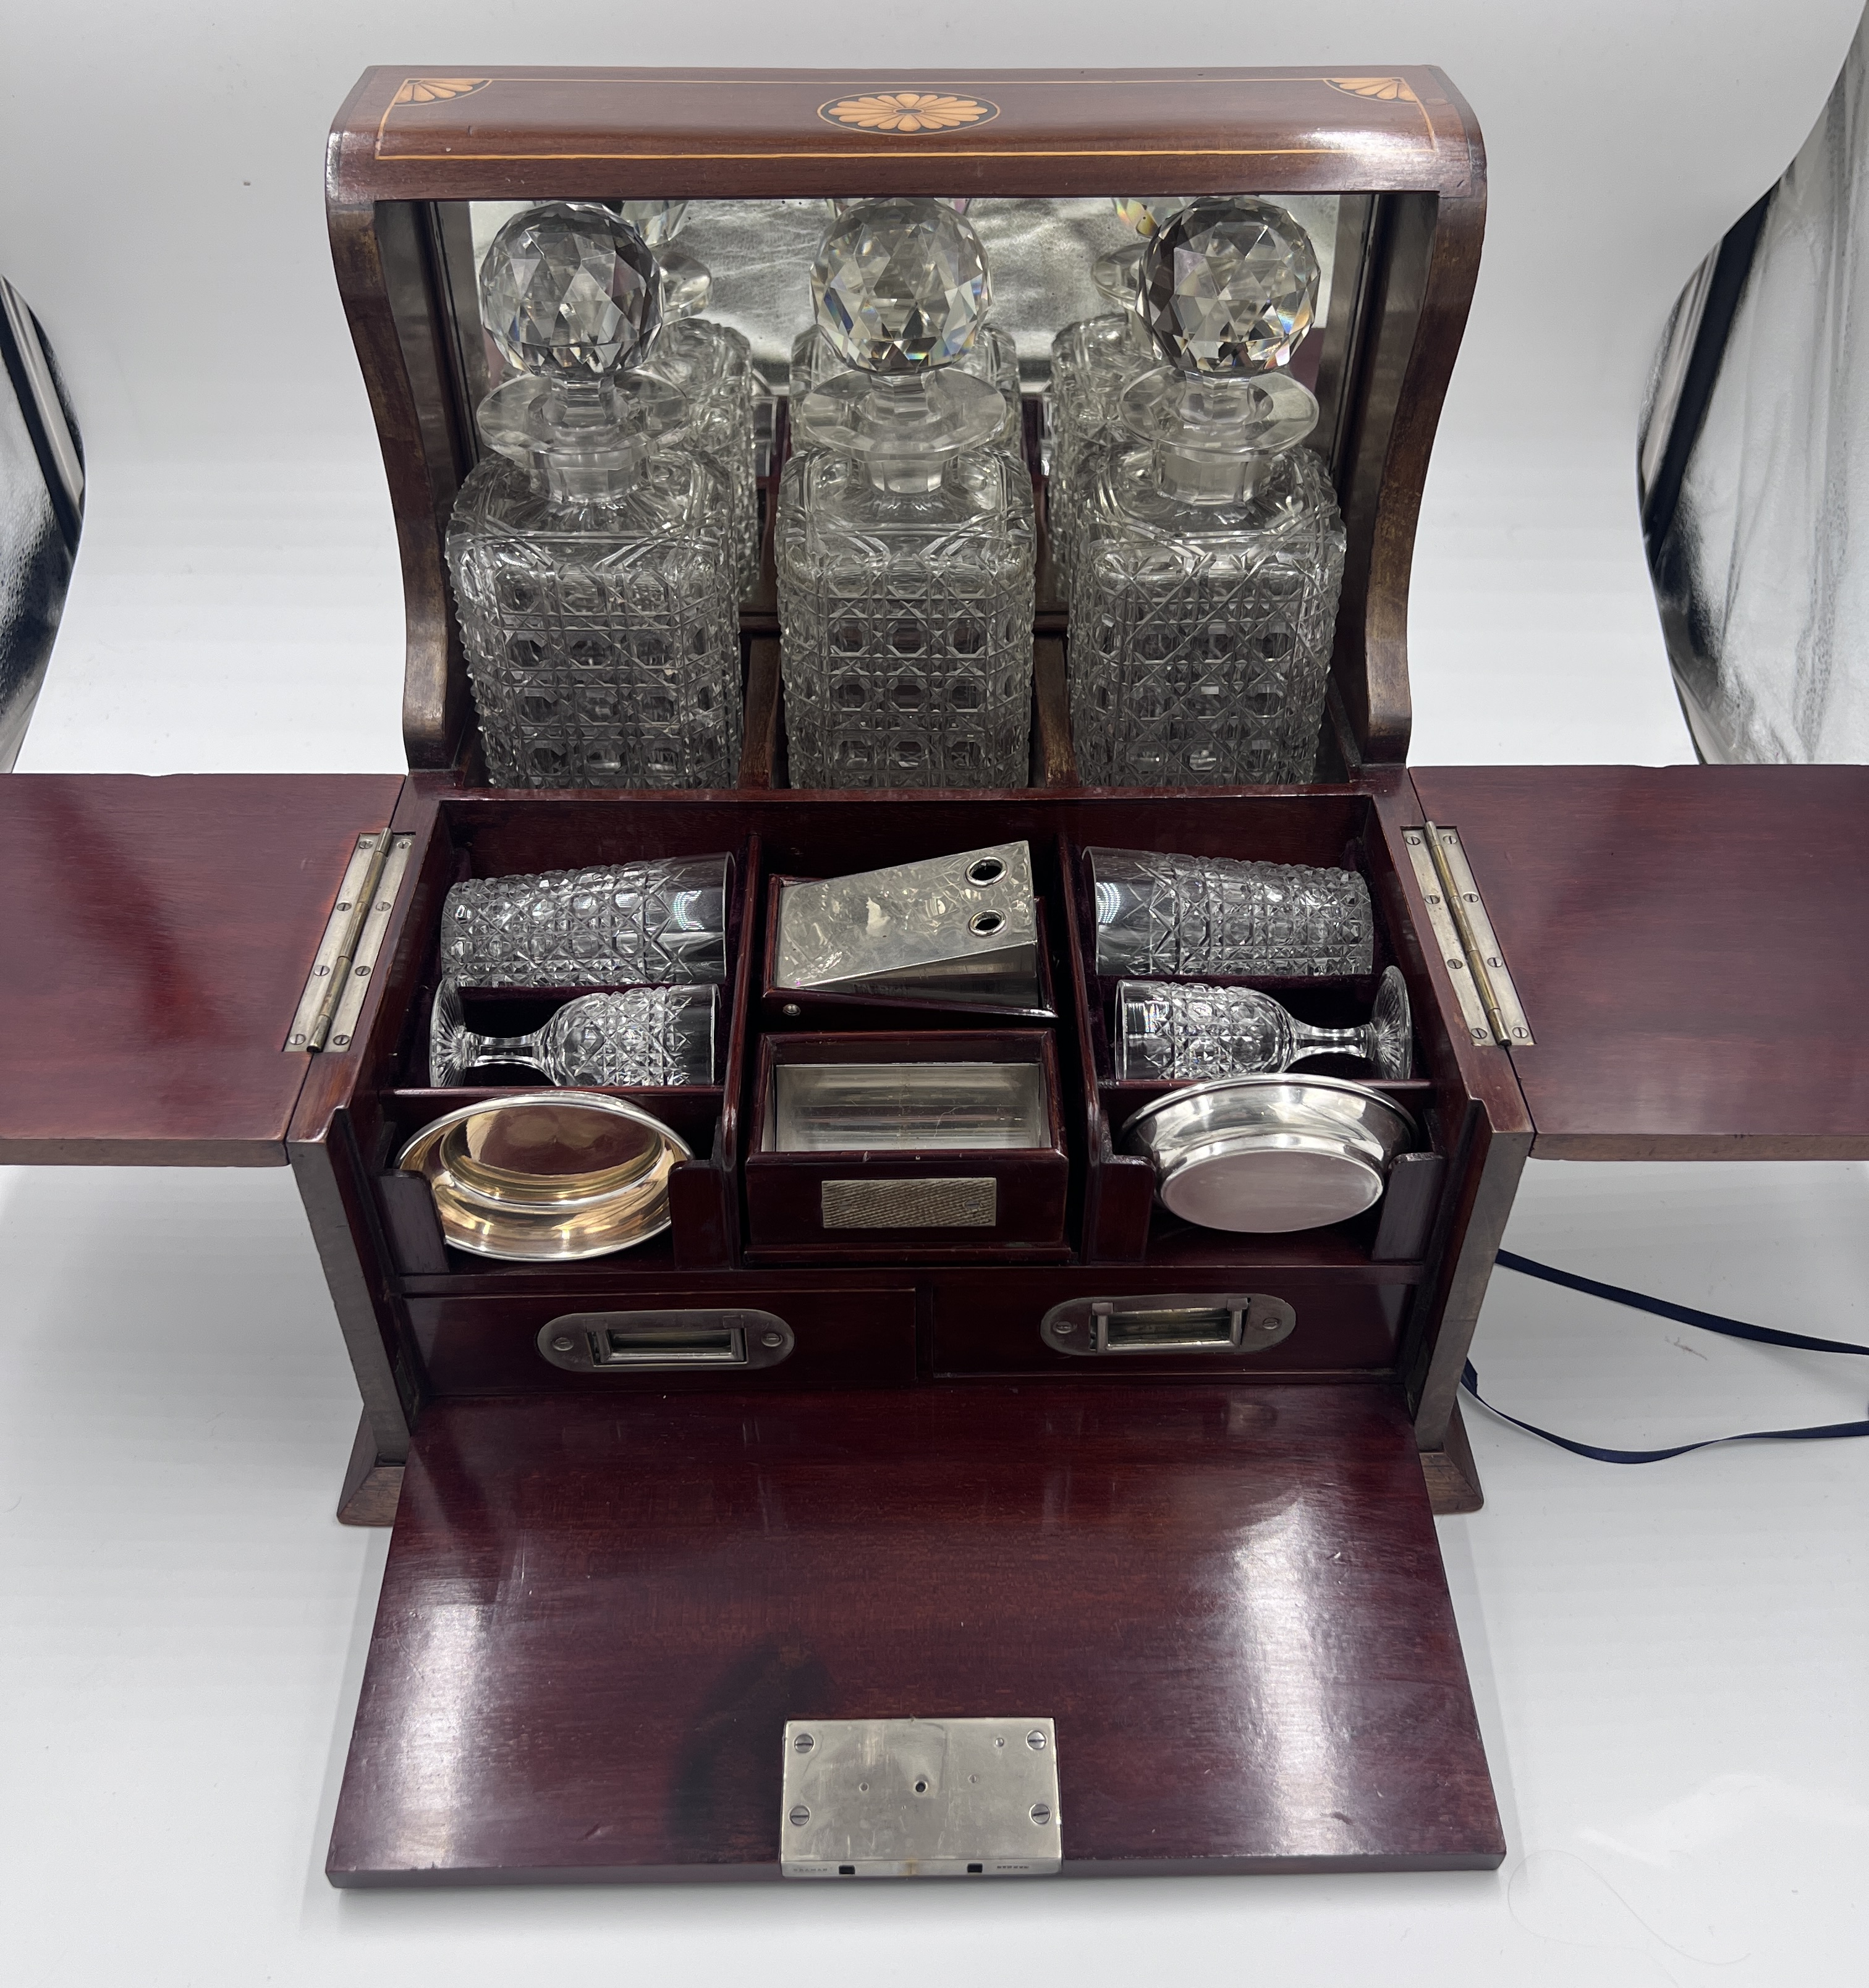 An Edwardian mahogany inlaid cut glass tantalus and games box containing cigar cutter, silver plated - Image 9 of 14